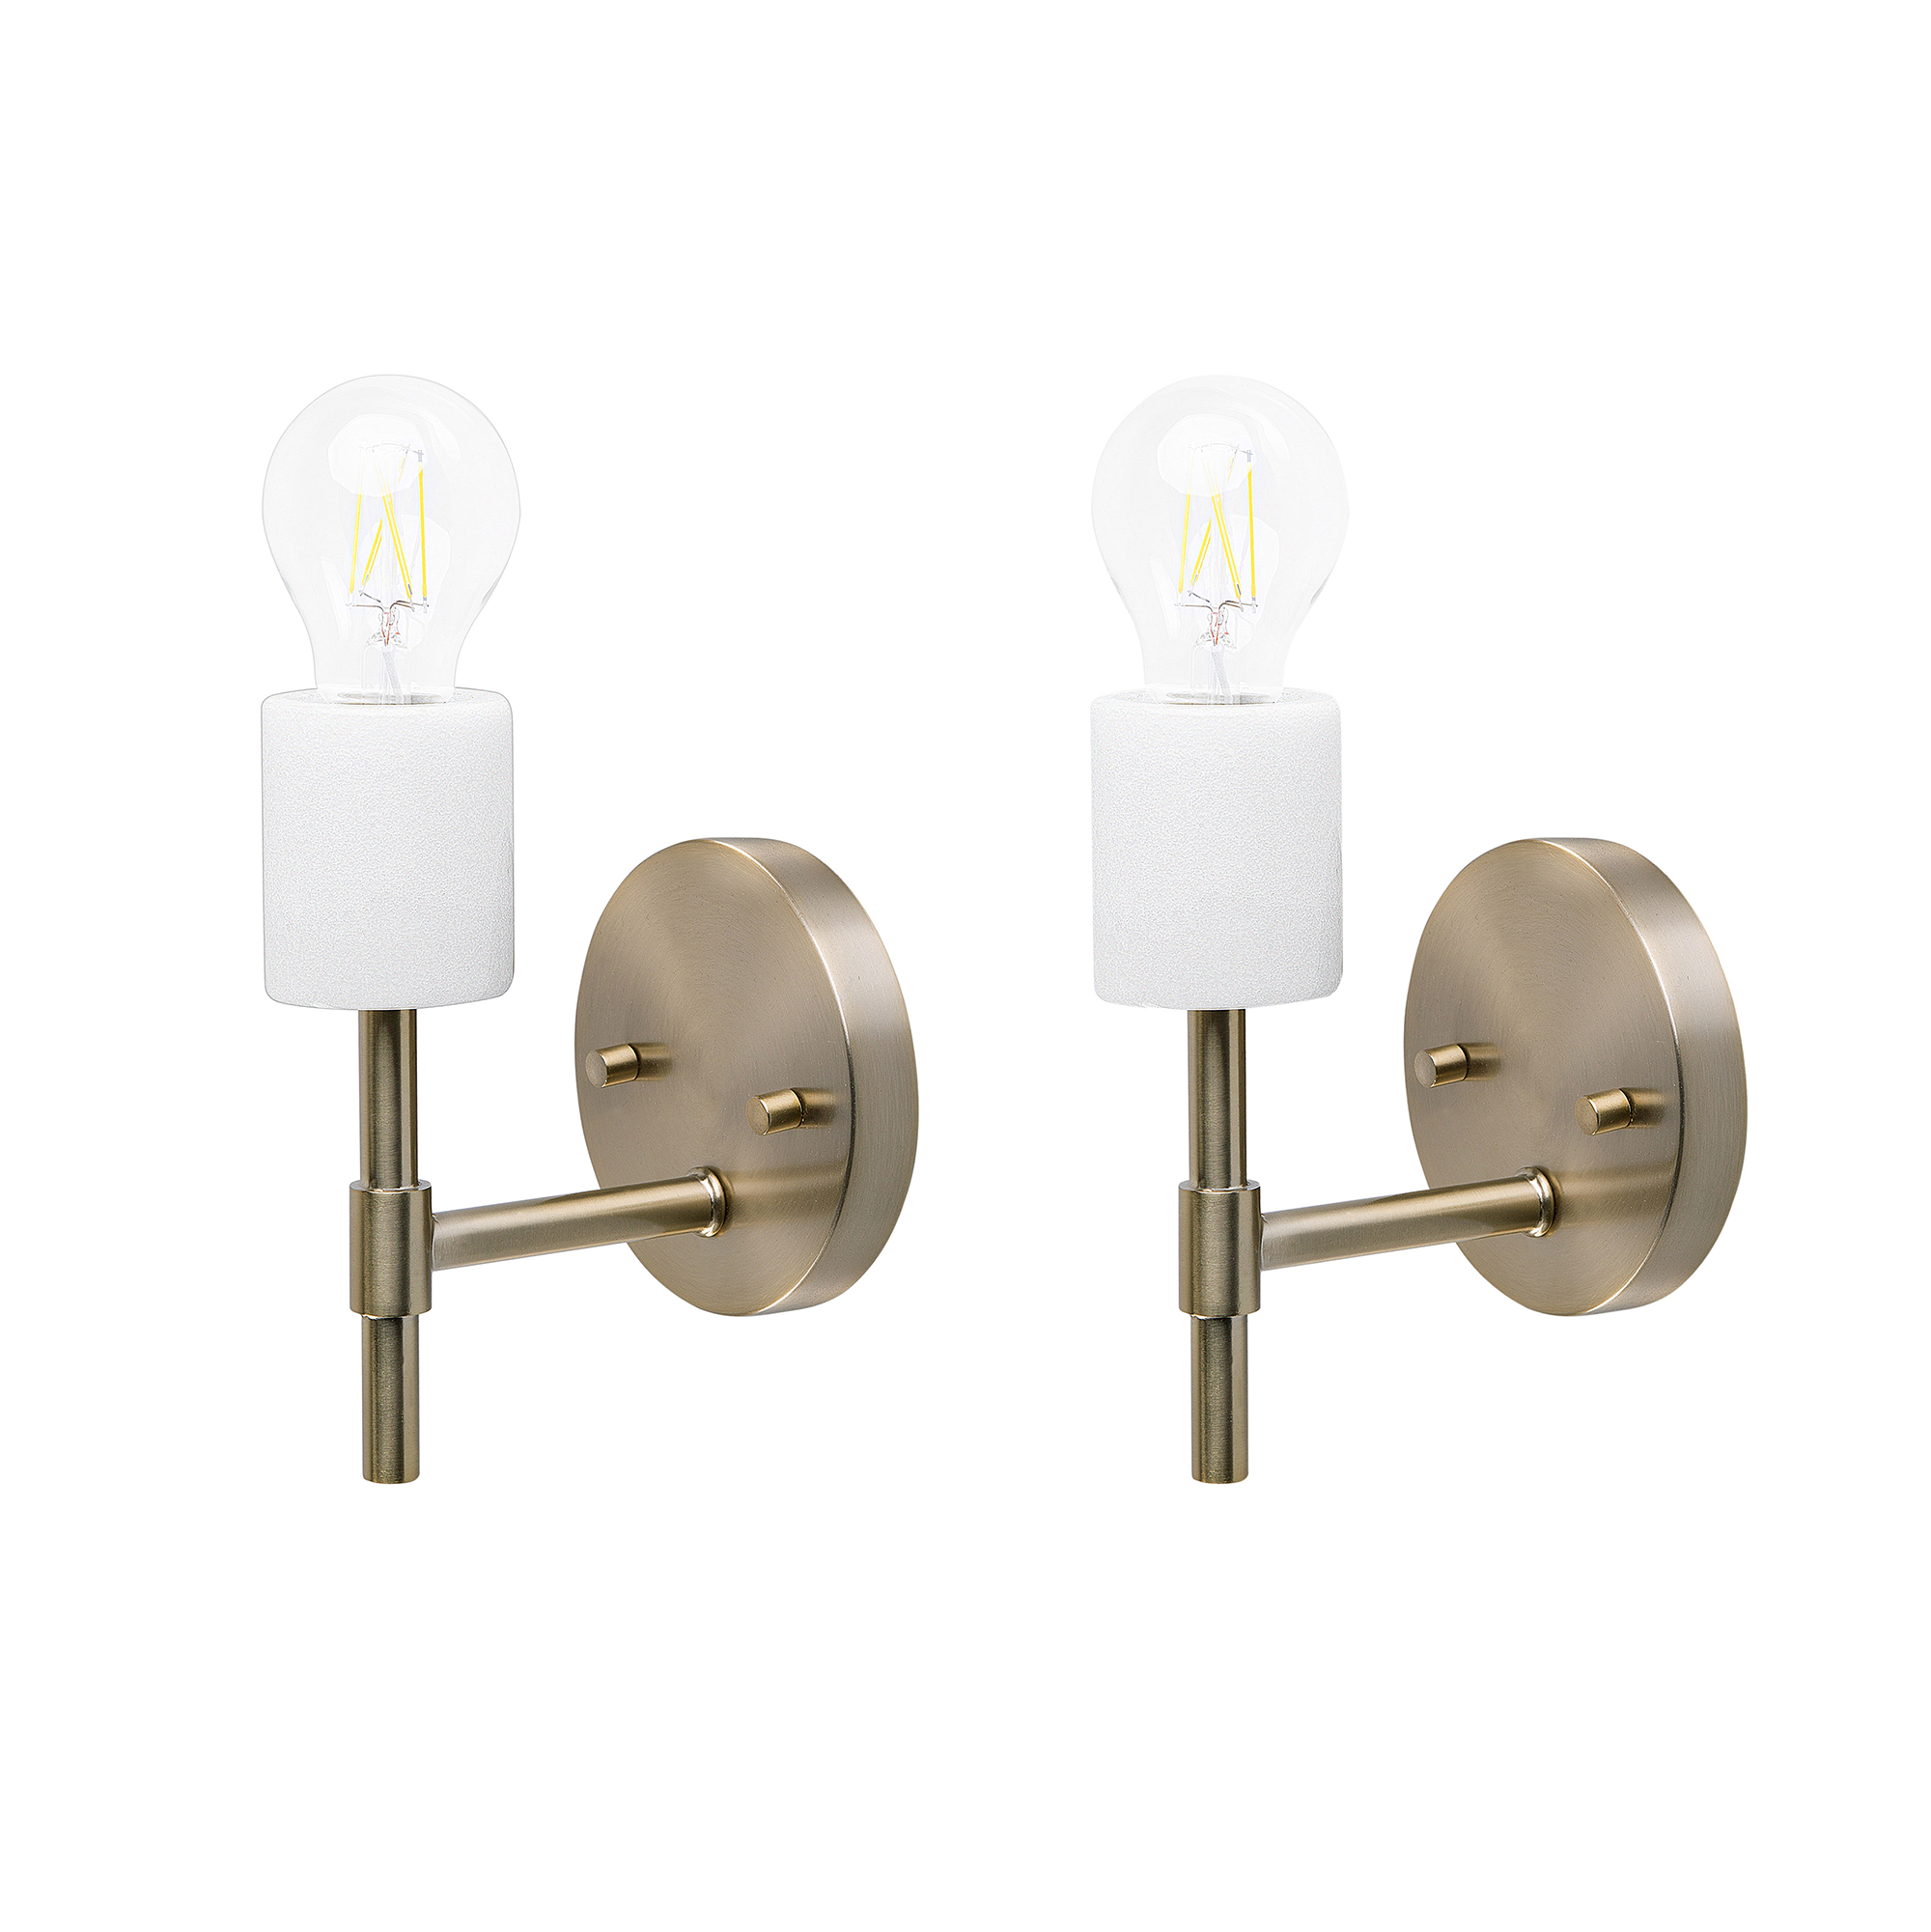 Beliani Set of 2 Wall Lamps White and Golden Metal Marble Adjustable Lampshade Industrial